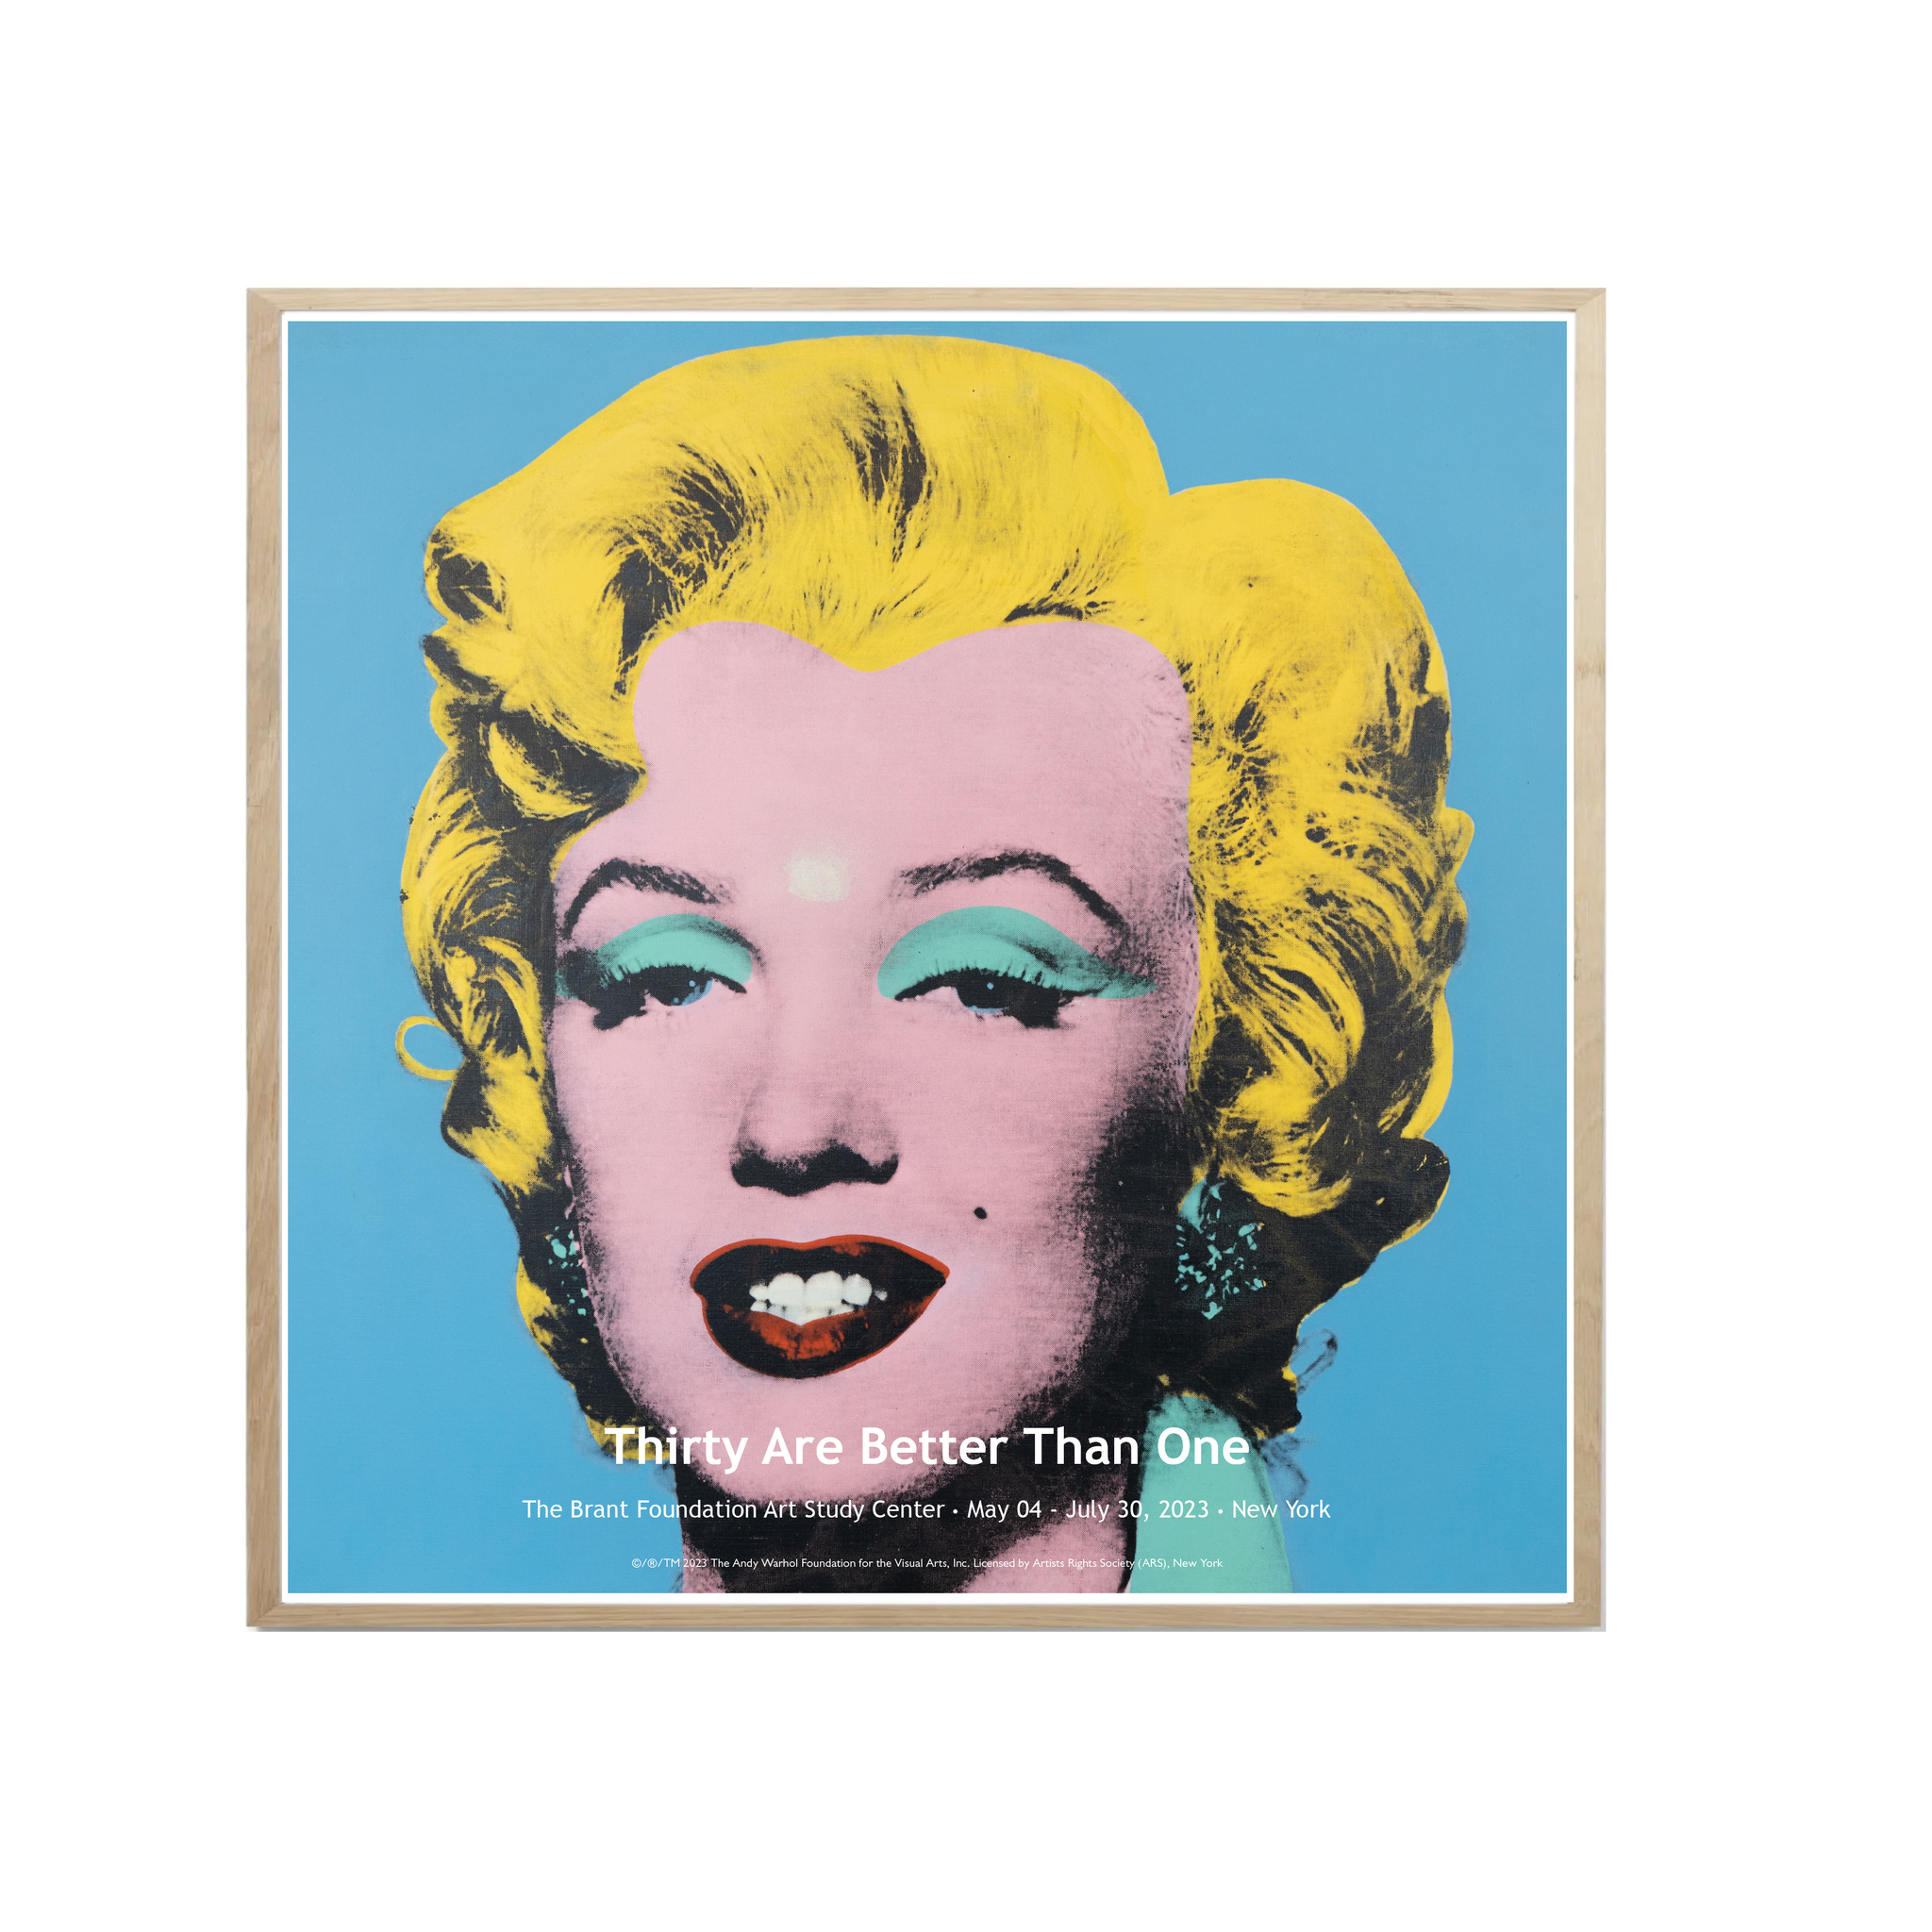 Andy Warhol "Blue Marilyn" Poster